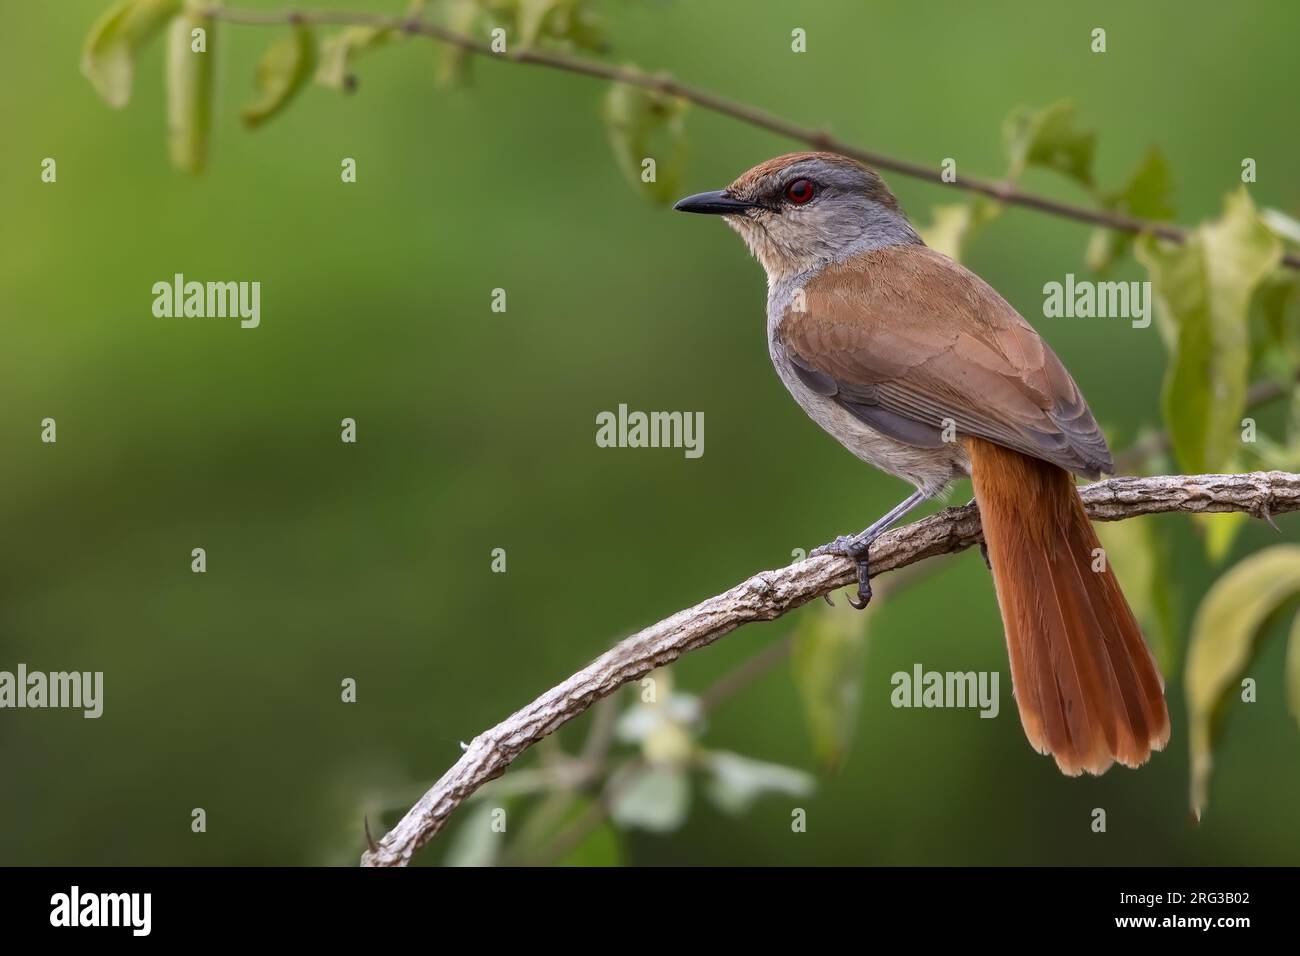 Rufous-tailed Palm Thrush (Cichladusa ruficauda) perched on a branch in Angola. Stock Photo